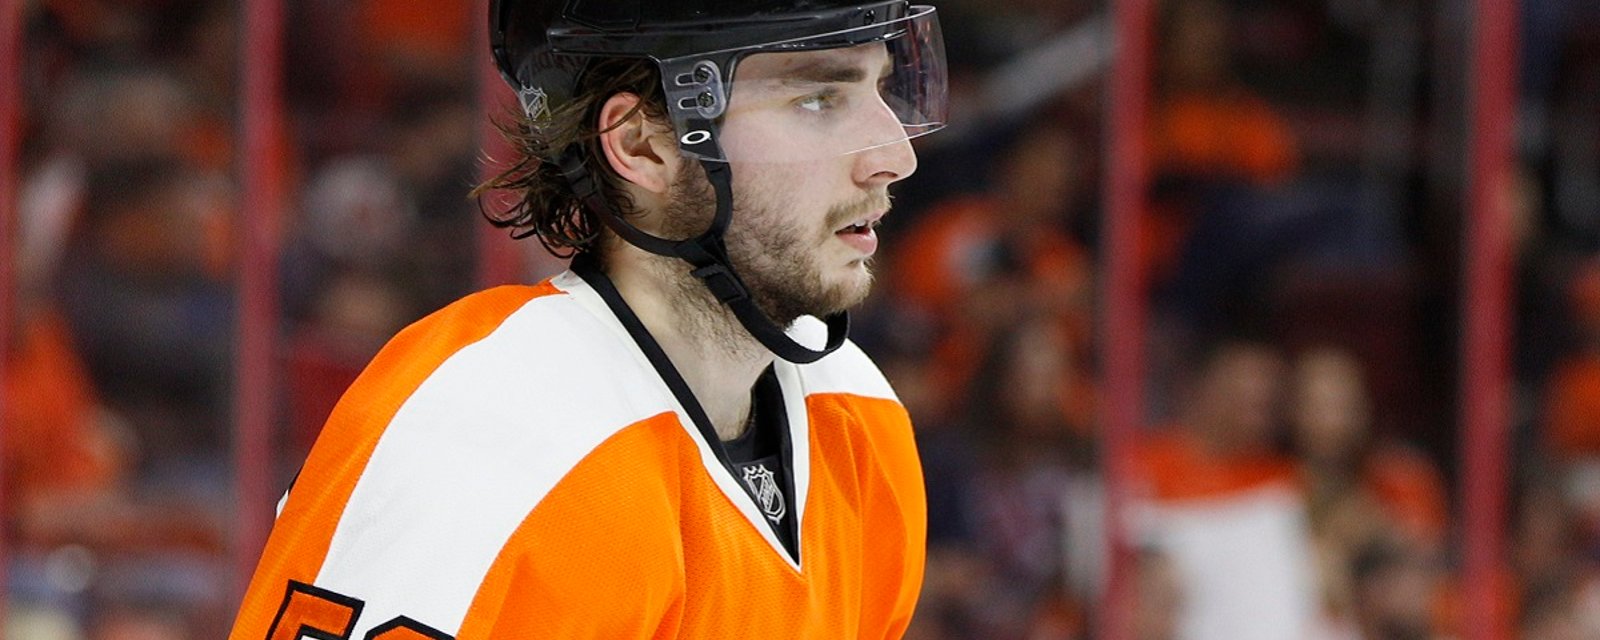 Gostisbehere sounds ready for a bounce back after sophomore slump.